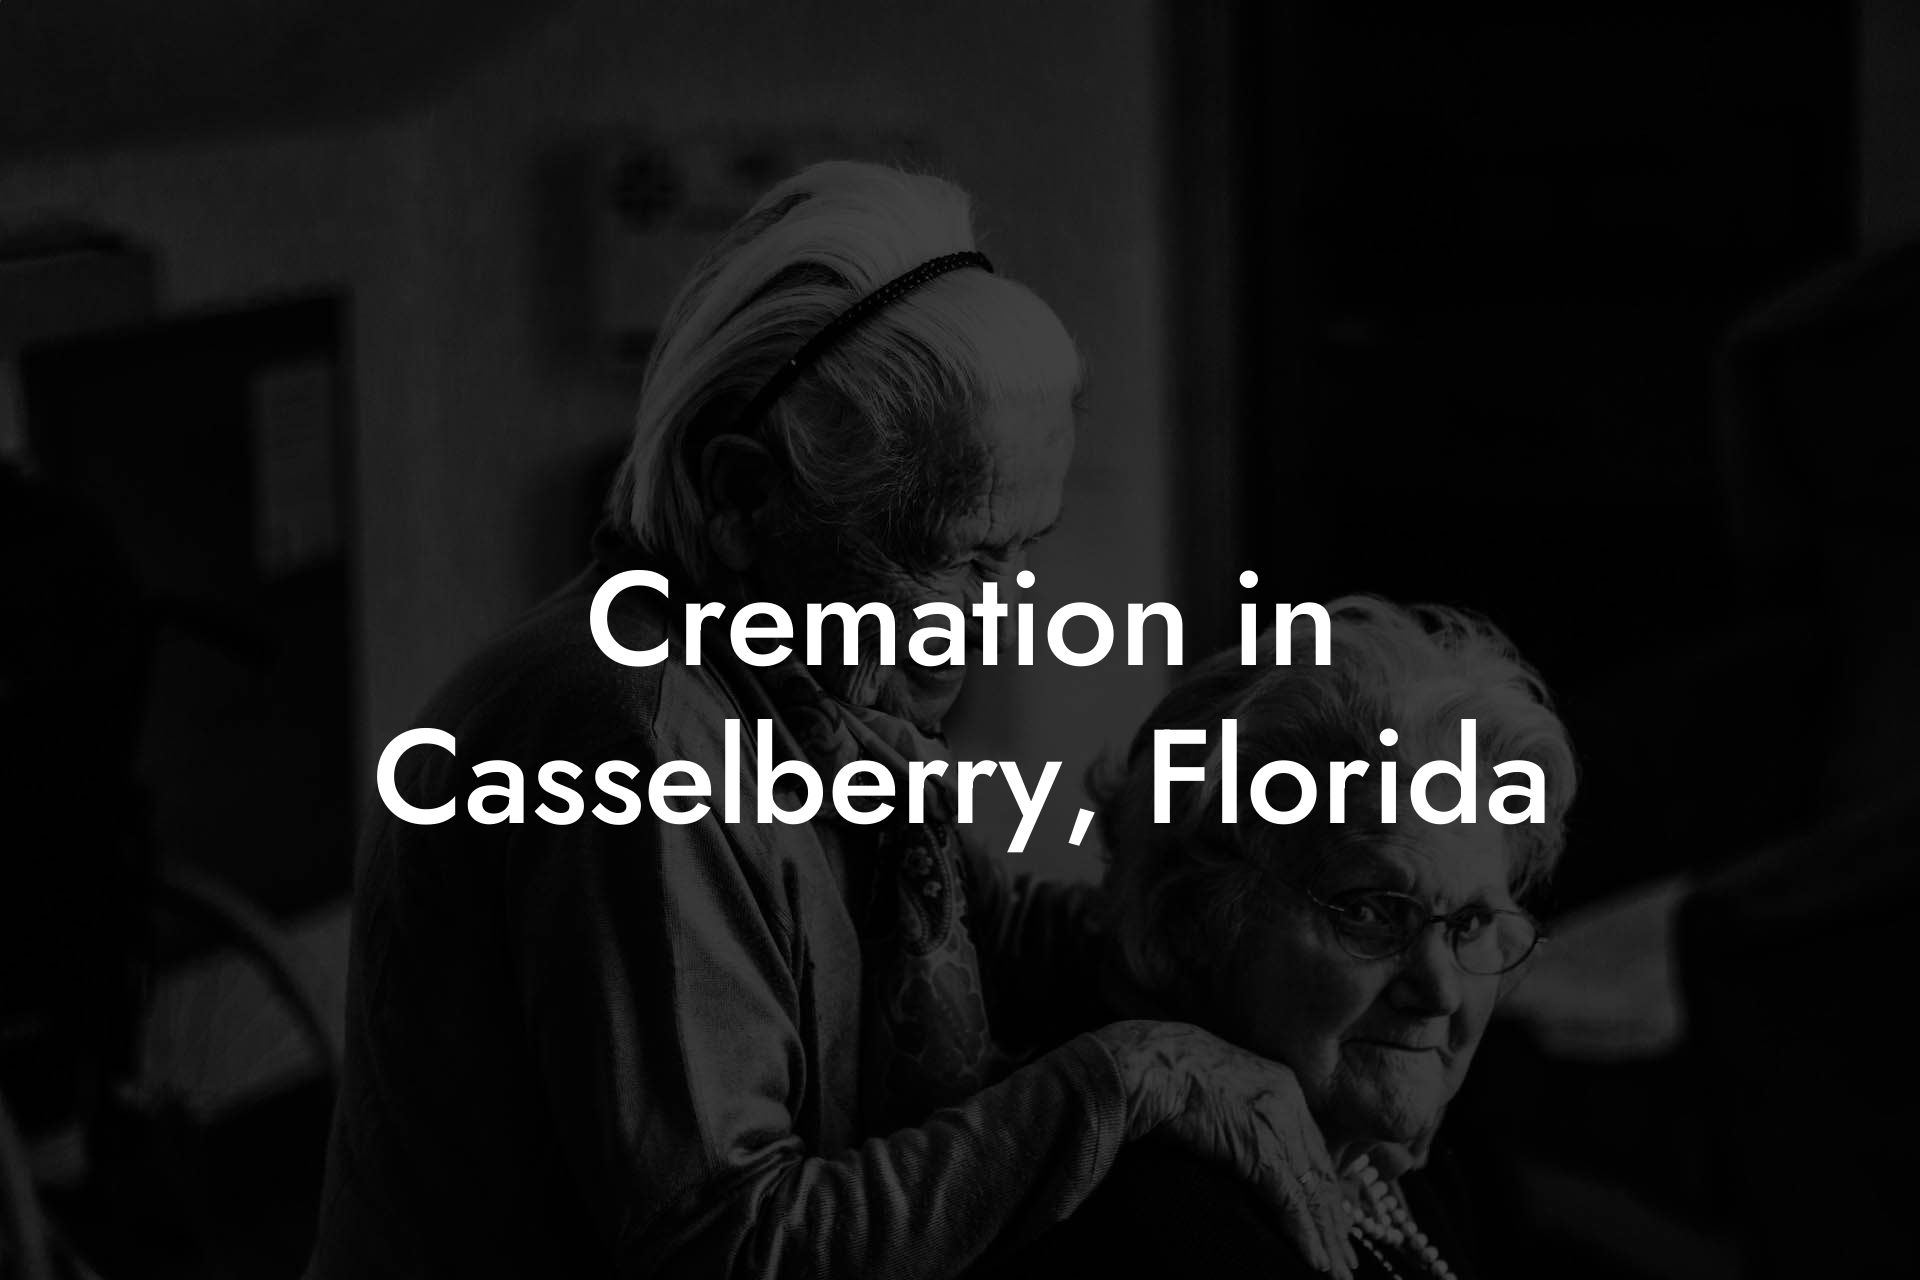 Cremation in Casselberry, Florida